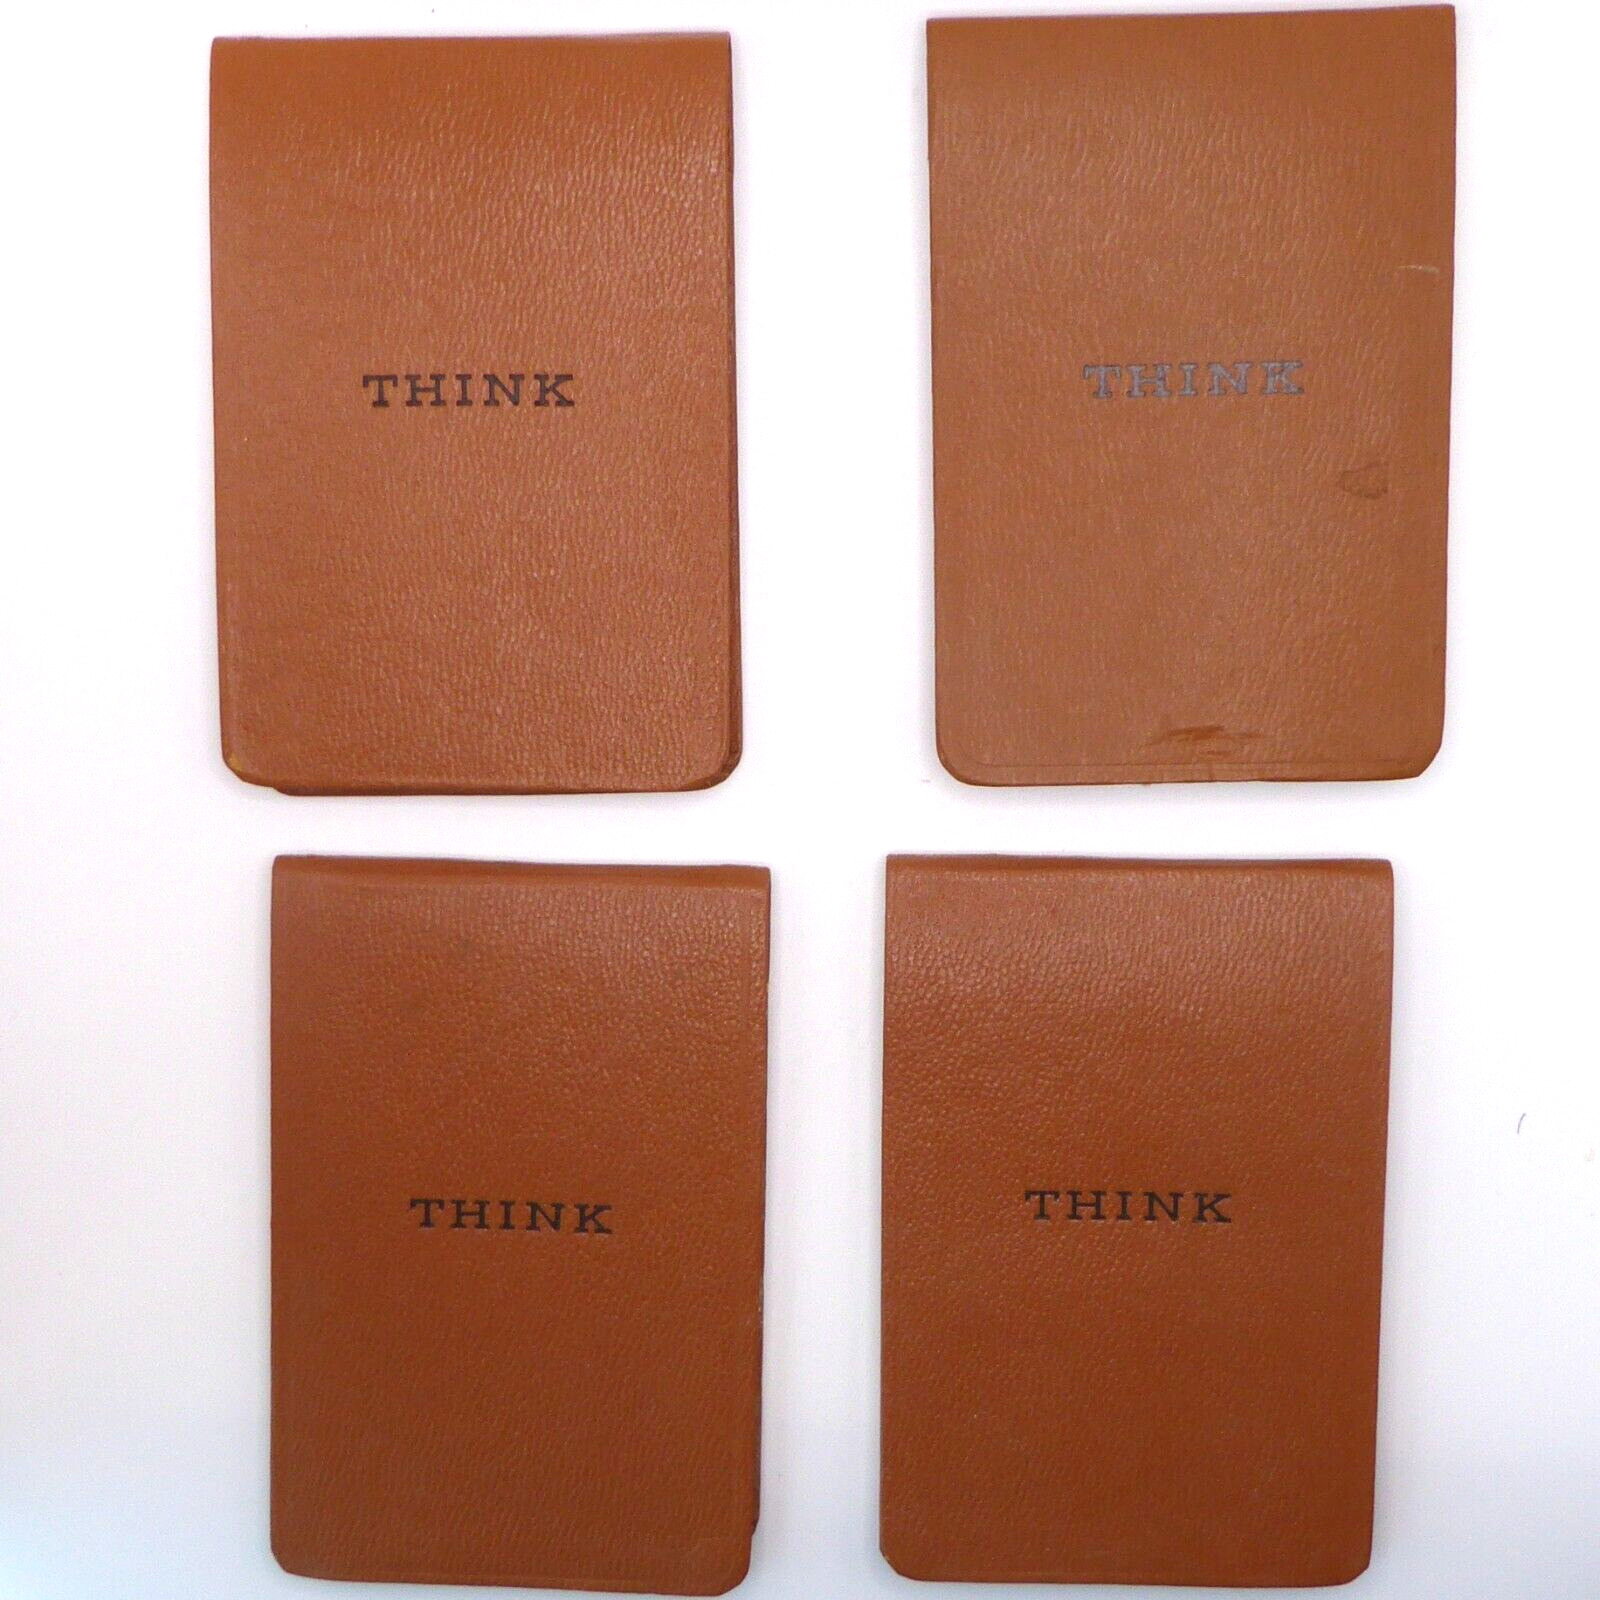 4 VTG IBM Think Notepads Thinkpads Pocket Paper Pad Notebooks 2 New 2 Used 1960s